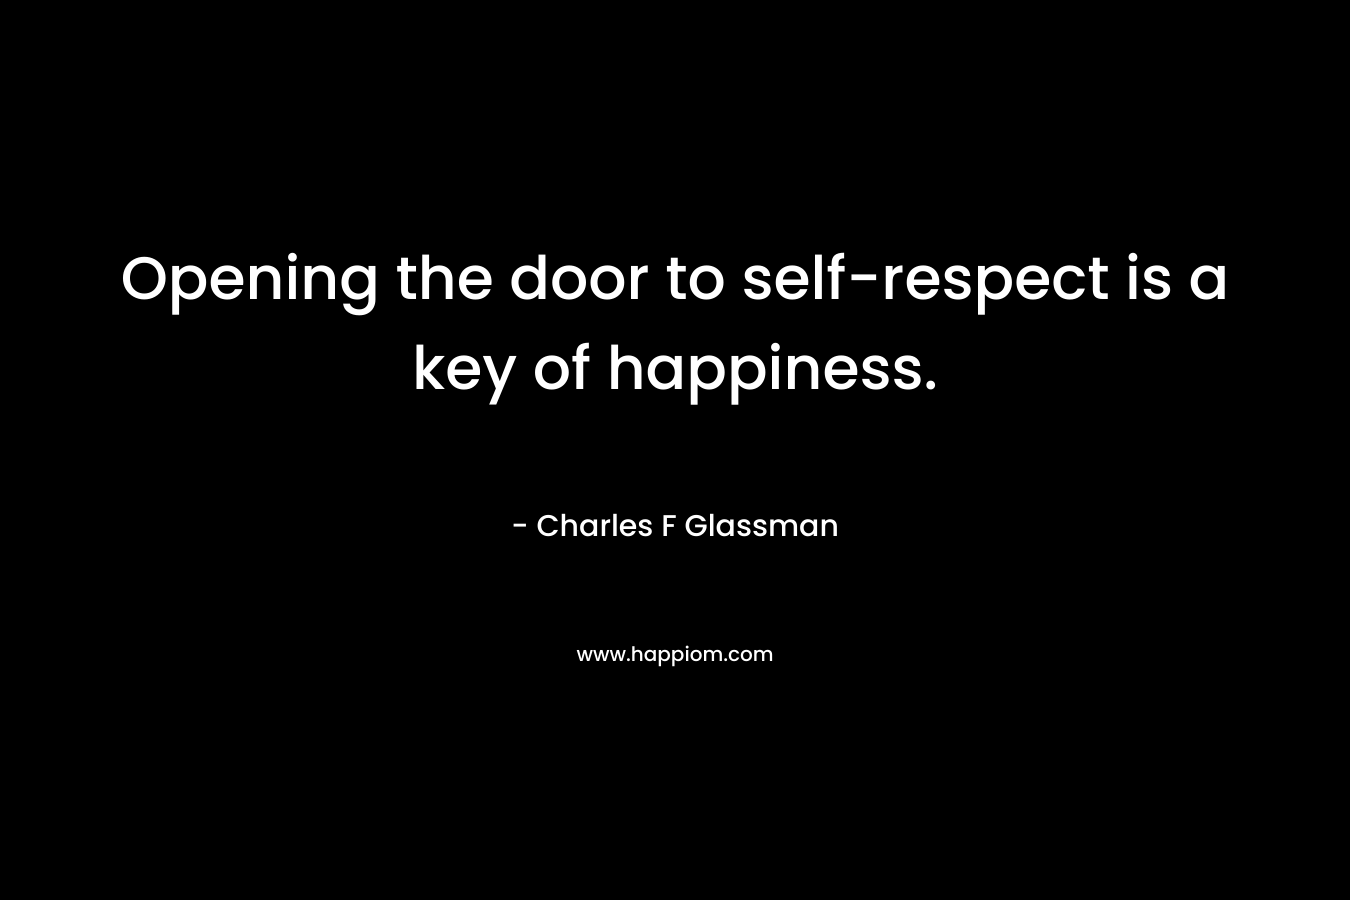 Opening the door to self-respect is a key of happiness.